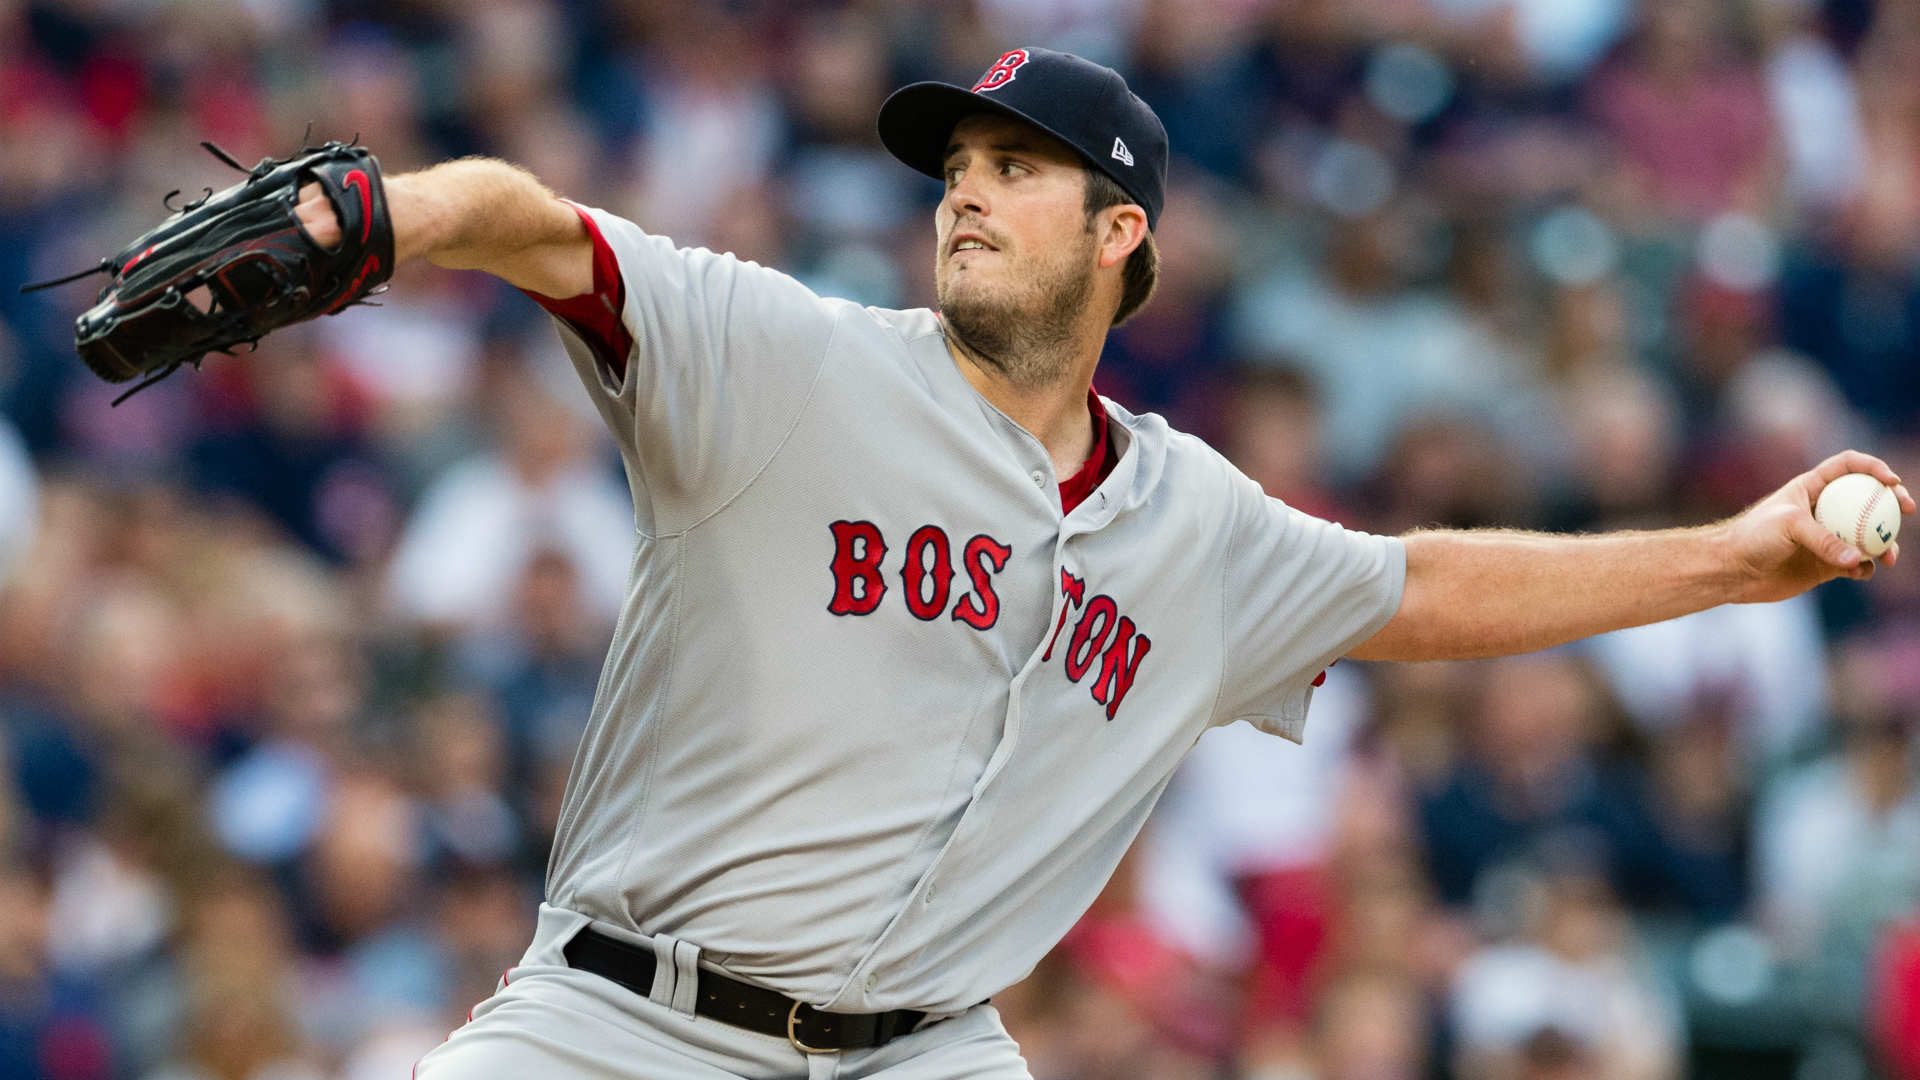 In 32 starts in 2017, Pomeranz was 17-6 with a 3.32 ERA, 1.35 WHIP and 4.0 WAR.